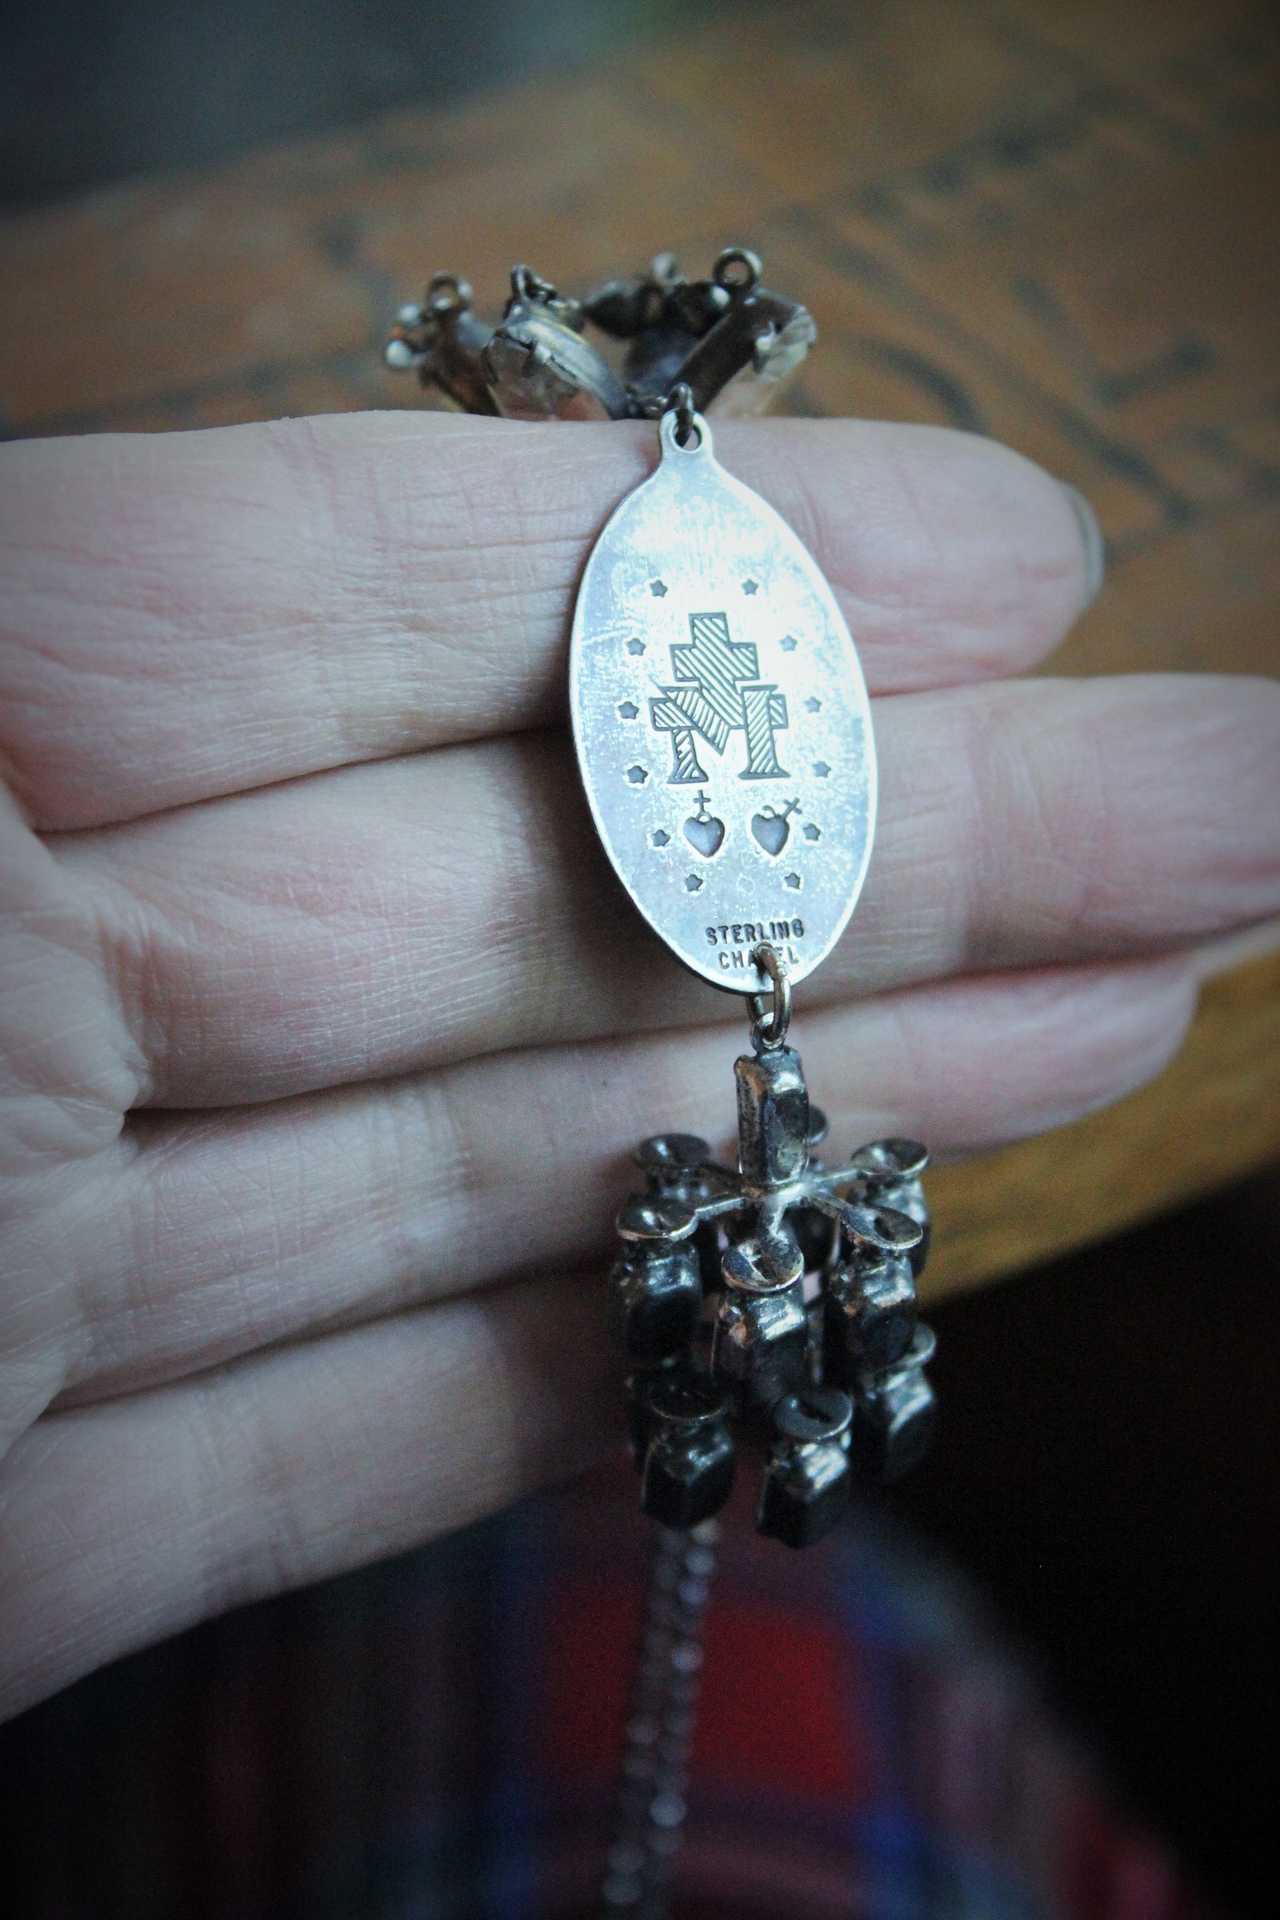 Antique Marian Necklace & Earrings with Amazing Antique Rhinestone Drops,Antique Marian Medals, Sterling Chain & Clasp